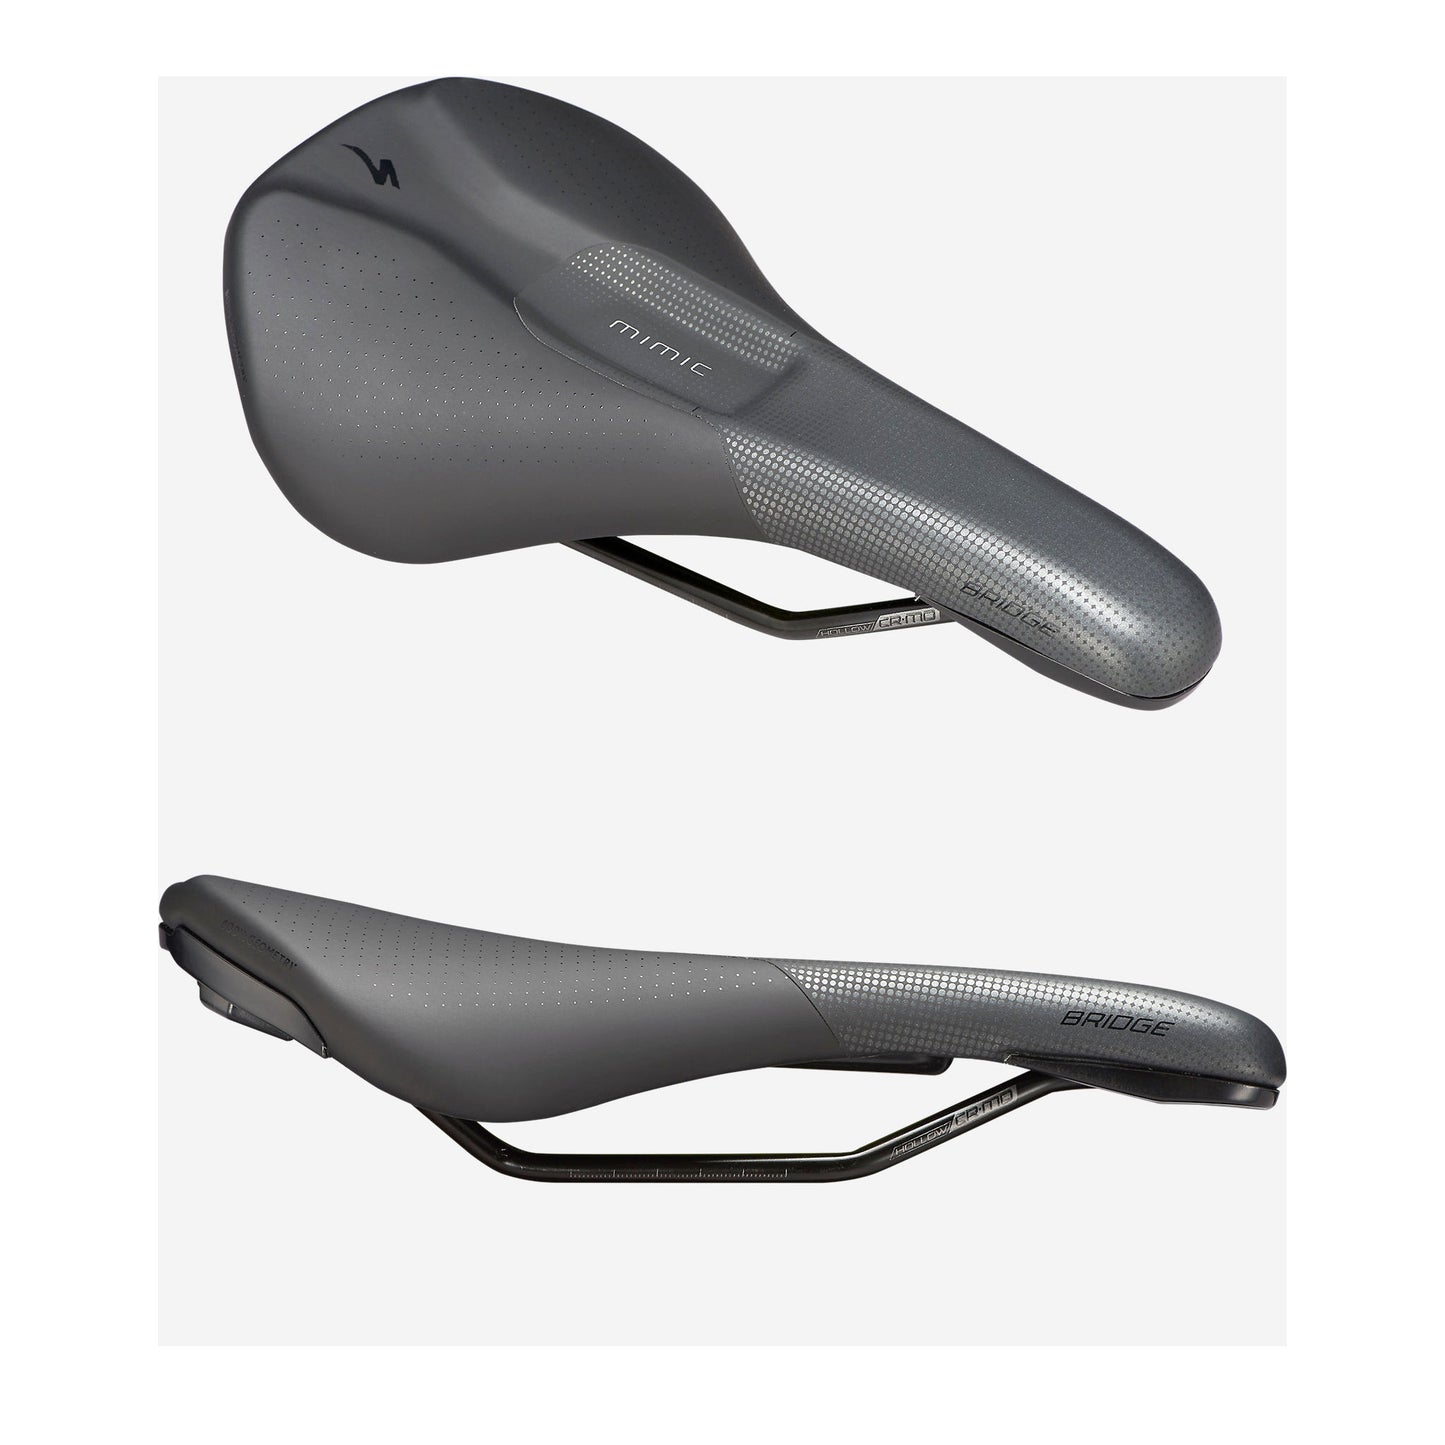 Specialized Bridge Comp with MIMIC Unisex Bicycle Saddle buy online at Woolys Wheels Sydney with free delivery